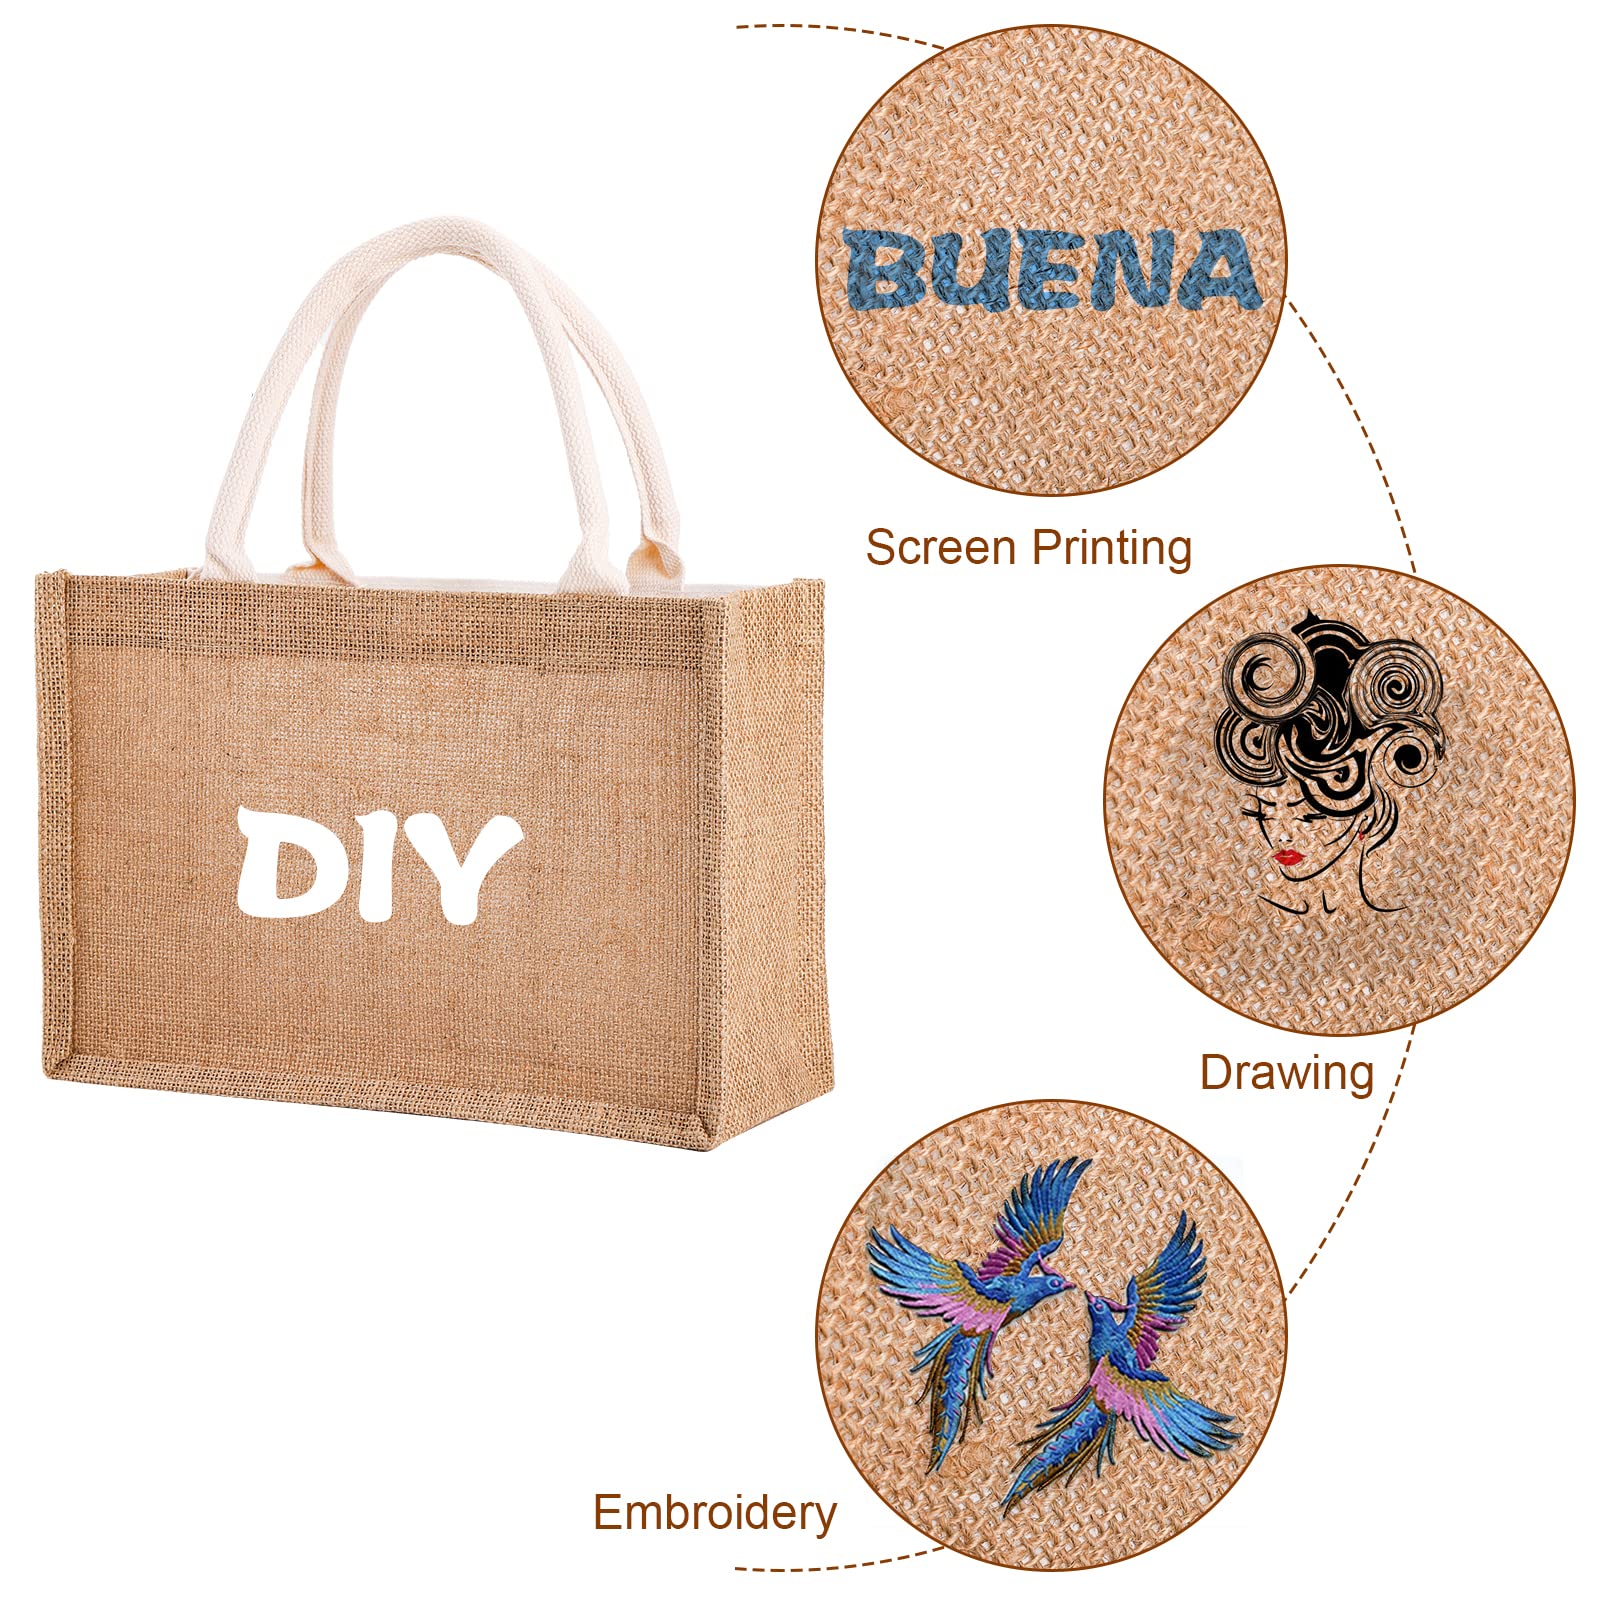 SOUJOY 6 Pack Burlap Tote Bag, Reusable Jute Gift Totes with Handles, Water Resistant Beach Bag, 14.7'' x 9.8'' x 4.5'' Canvas Grocery Shopping Totes for Bridesmaid, DIY, Shopping, Wedding Bag